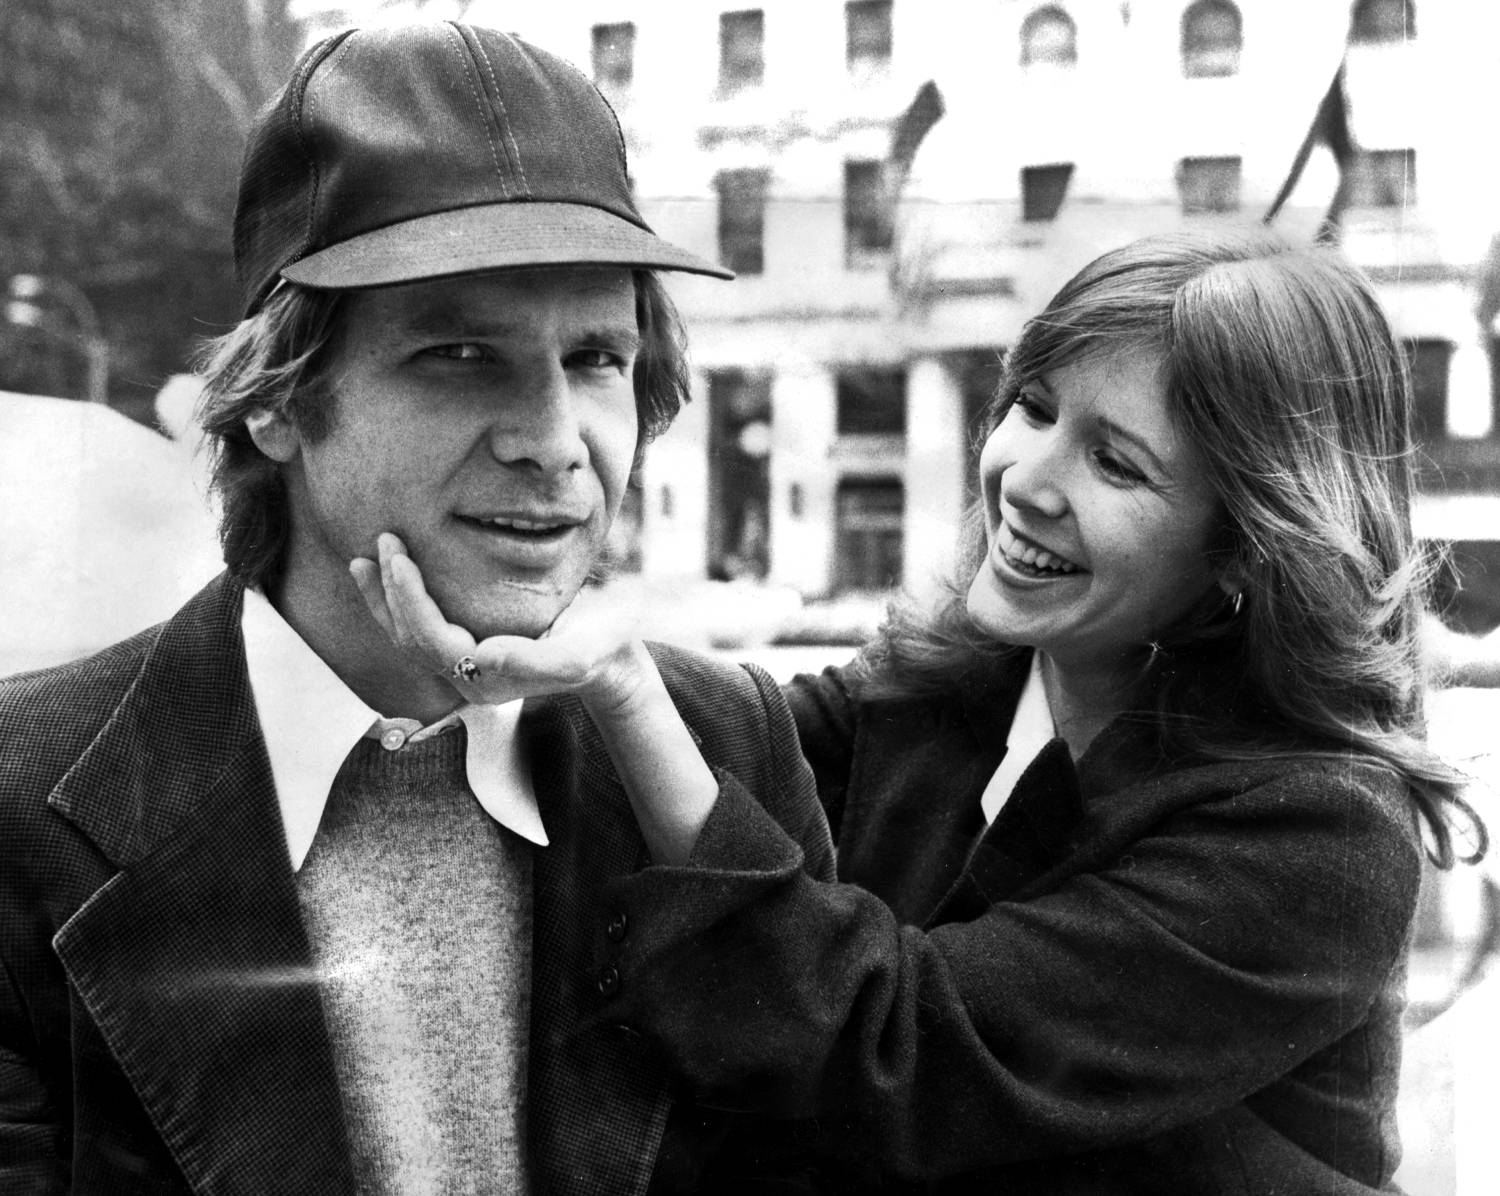 Harrison Ford and Carrie Fisher on Fifth Ave outside The Plaza hotel. They were in town for the movie "Star Wars."